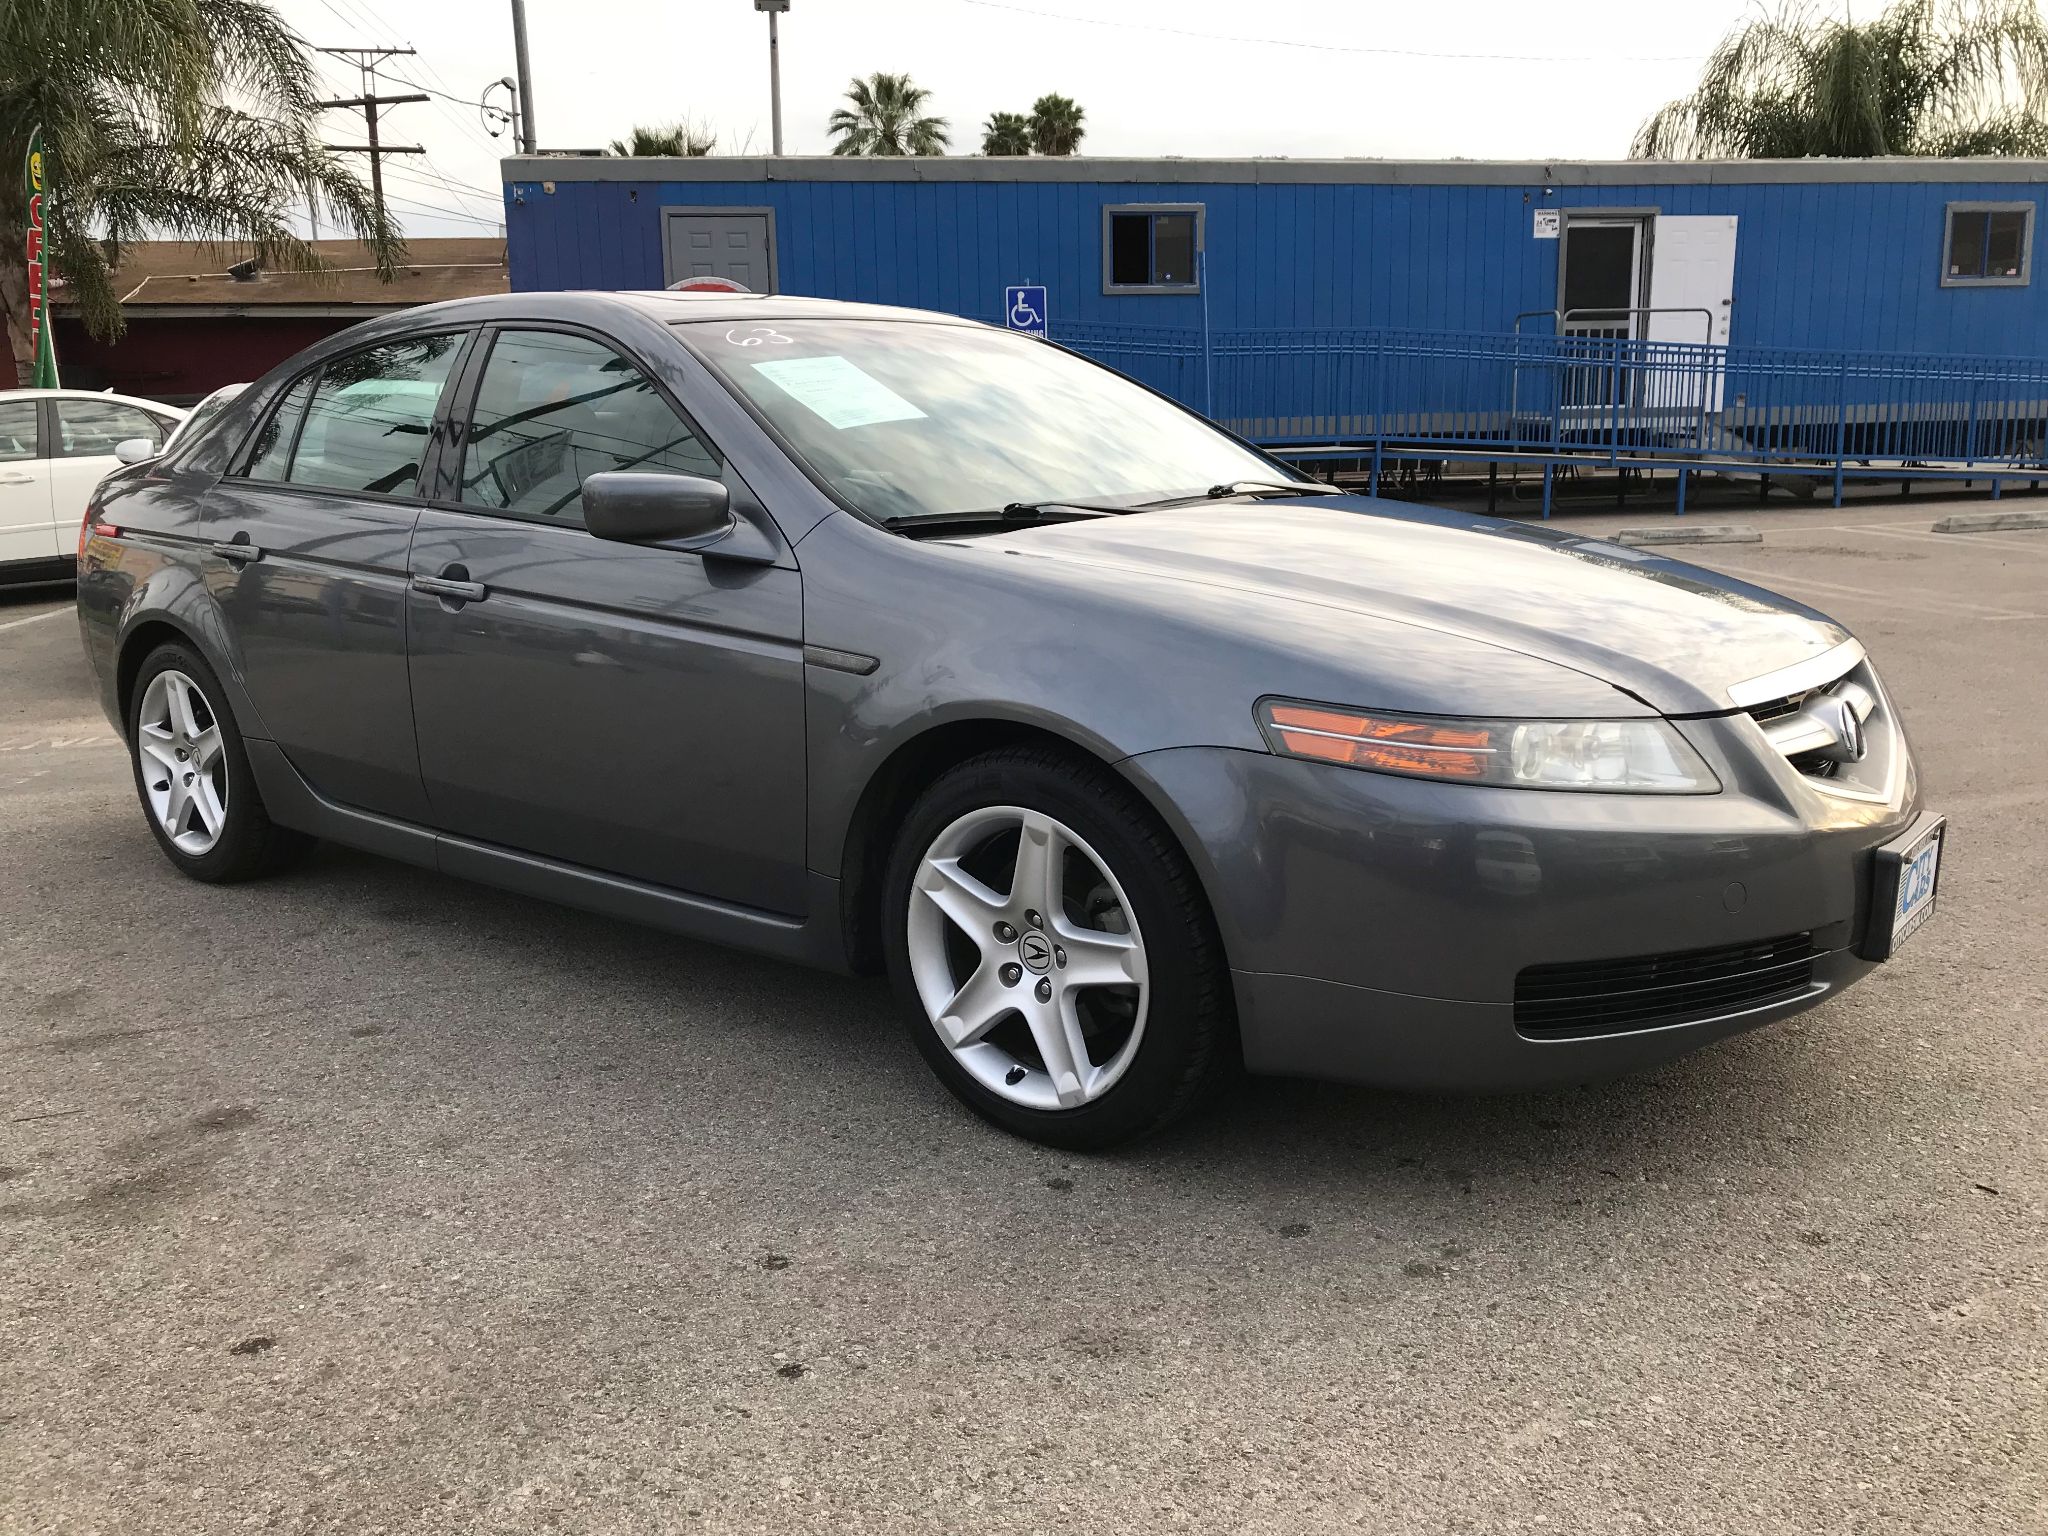 Used 2006 Acura Tl Navigation System At City Cars Warehouse Inc